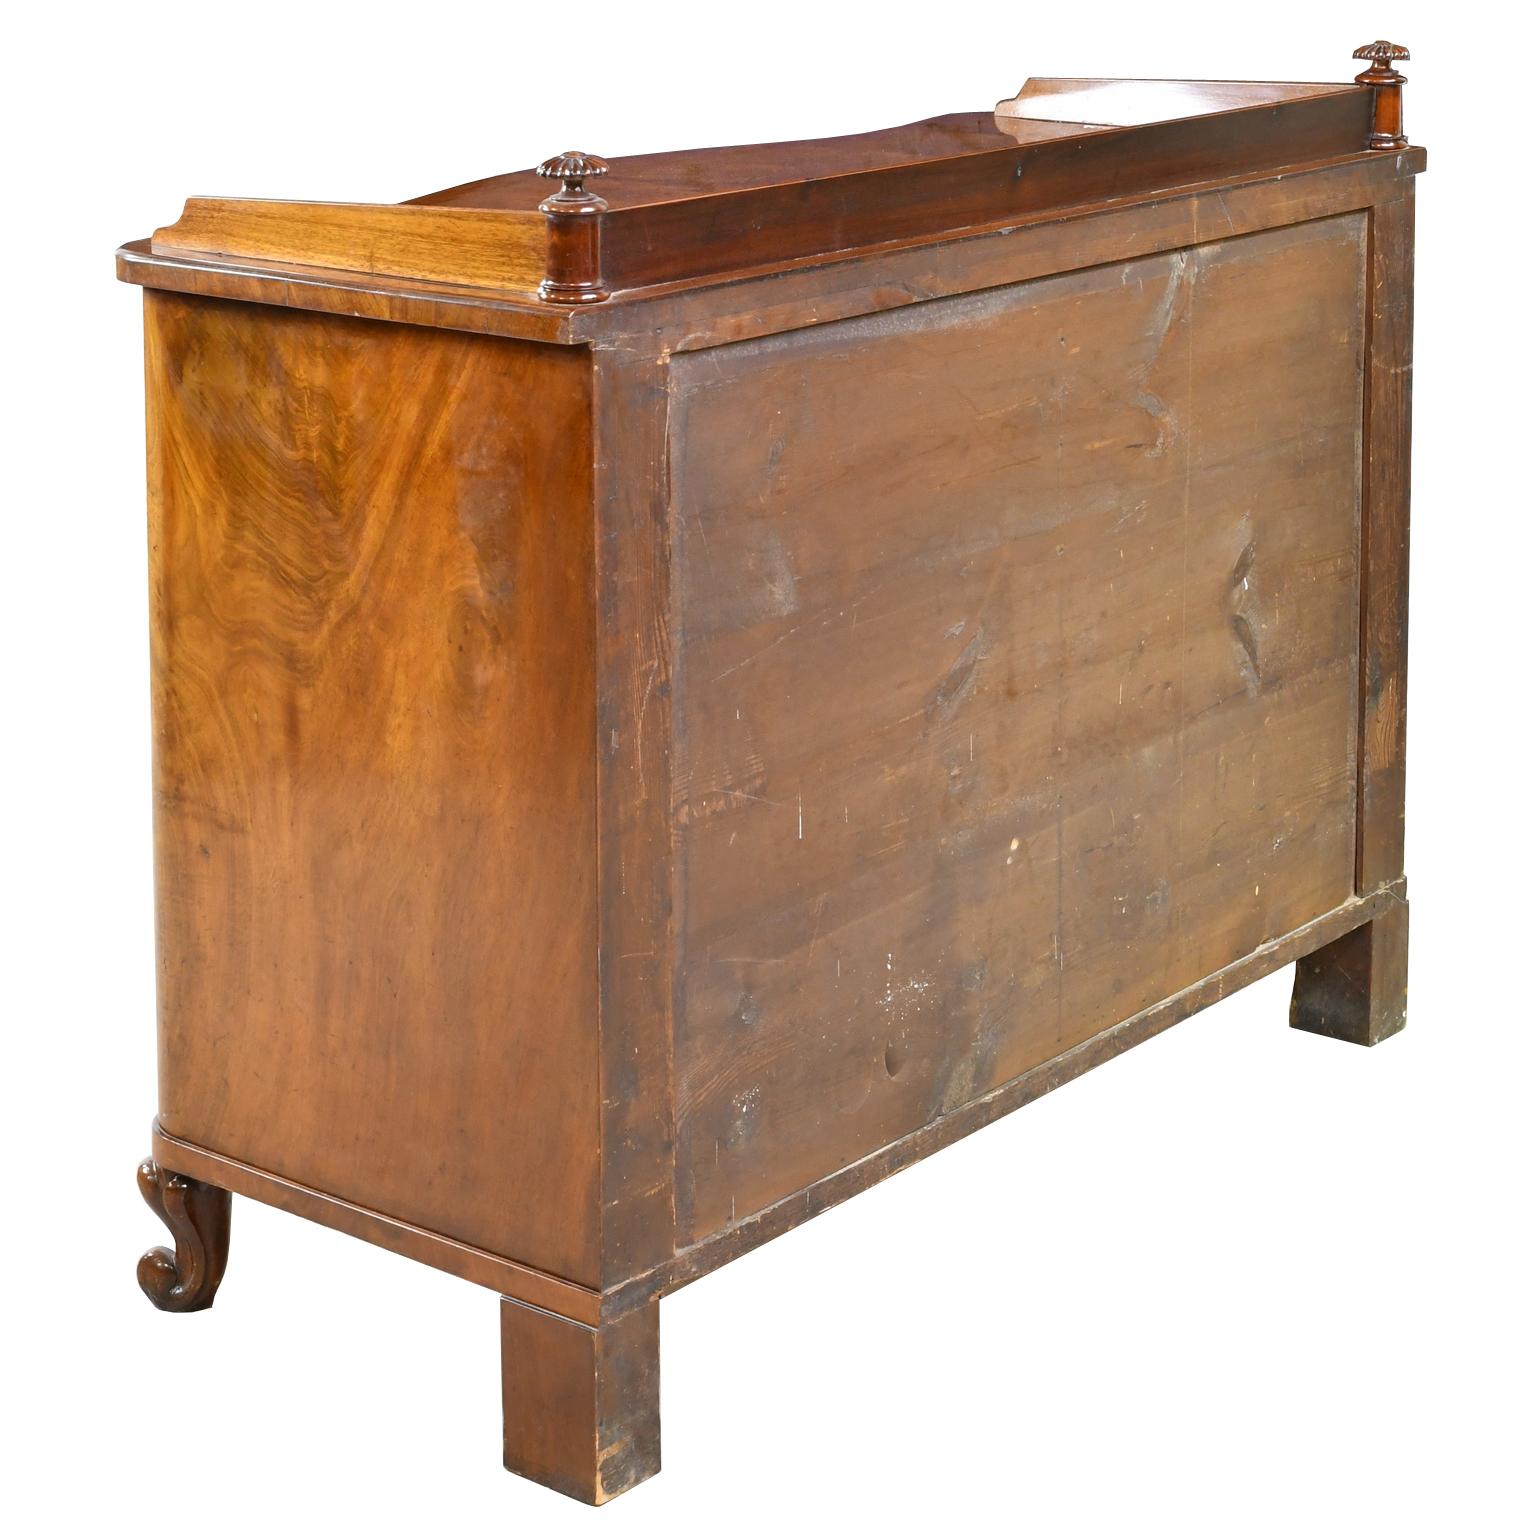 Hand-Carved Christian VIII Serpentine-Front Sideboard in West Indies Mahogany, circa 1850 For Sale